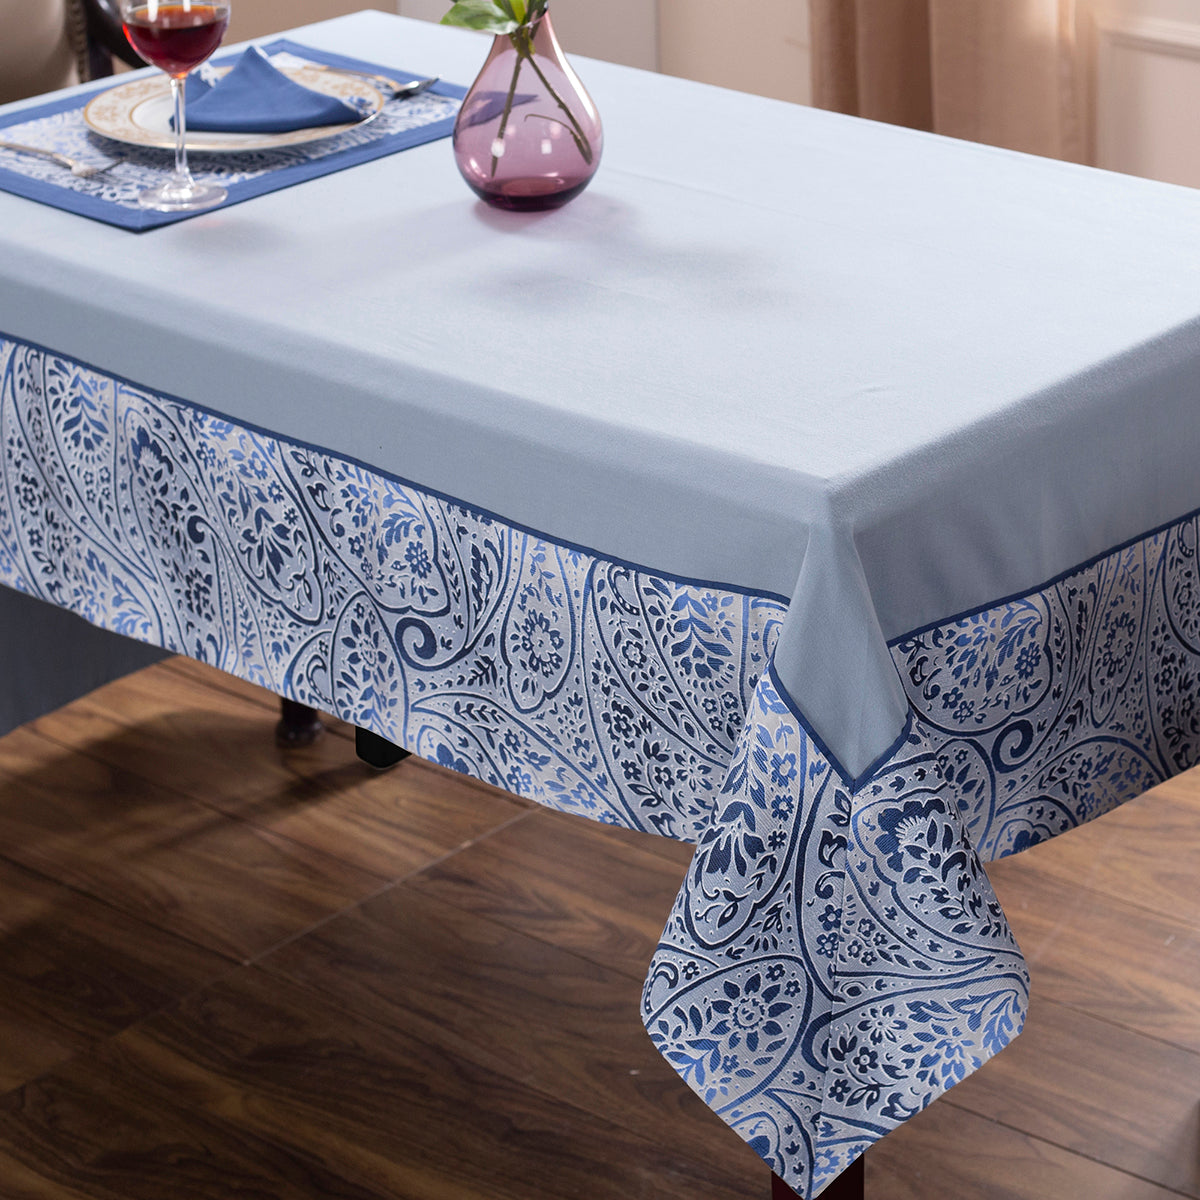 Hues Folklore Transition Ombre Bonanza Blue Table Cover